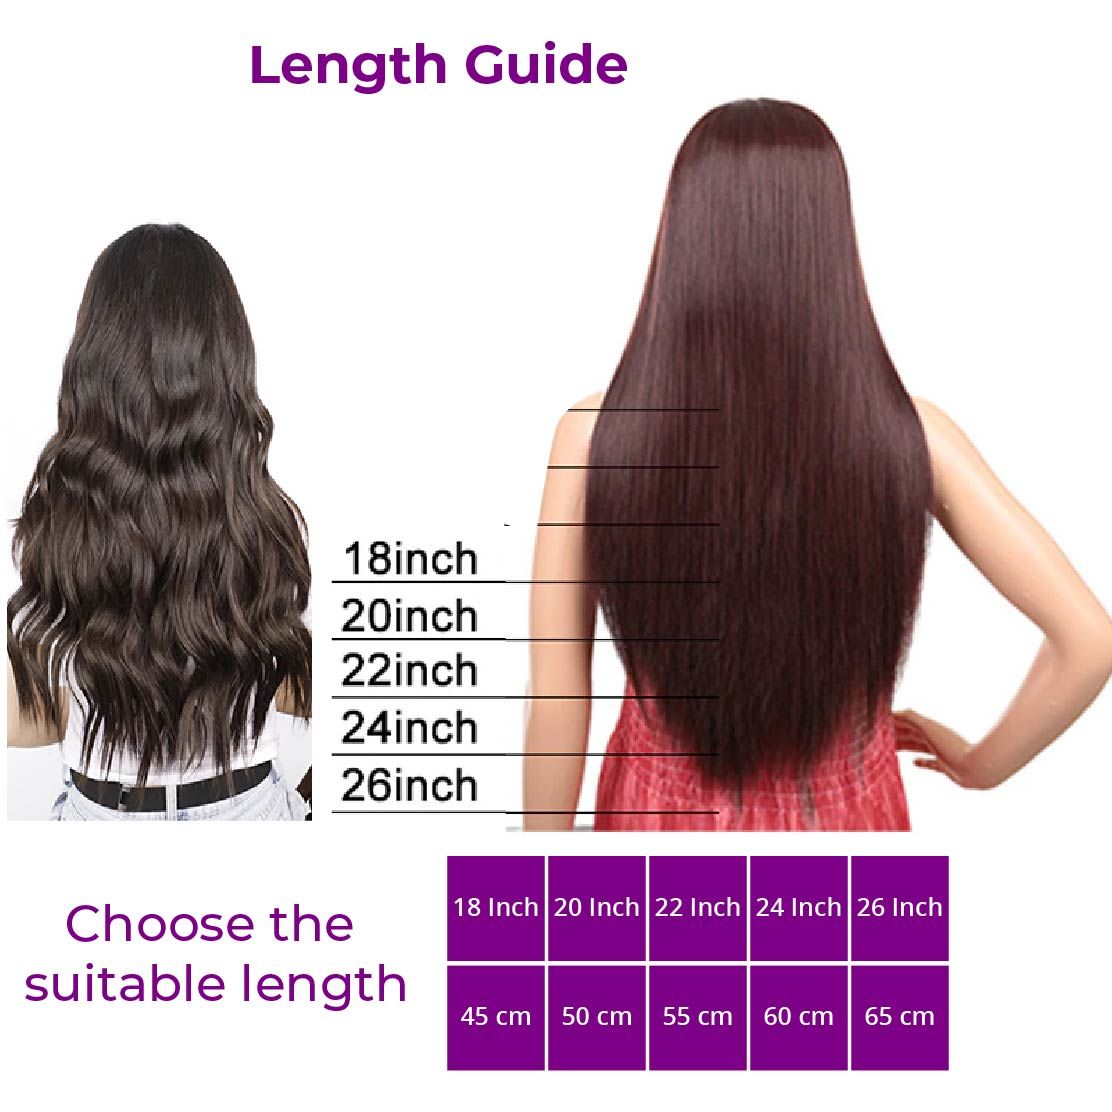 #2 Dark Brown 20" Deluxe Clip In Human Hair Extension - dulgehairextensions.com.au